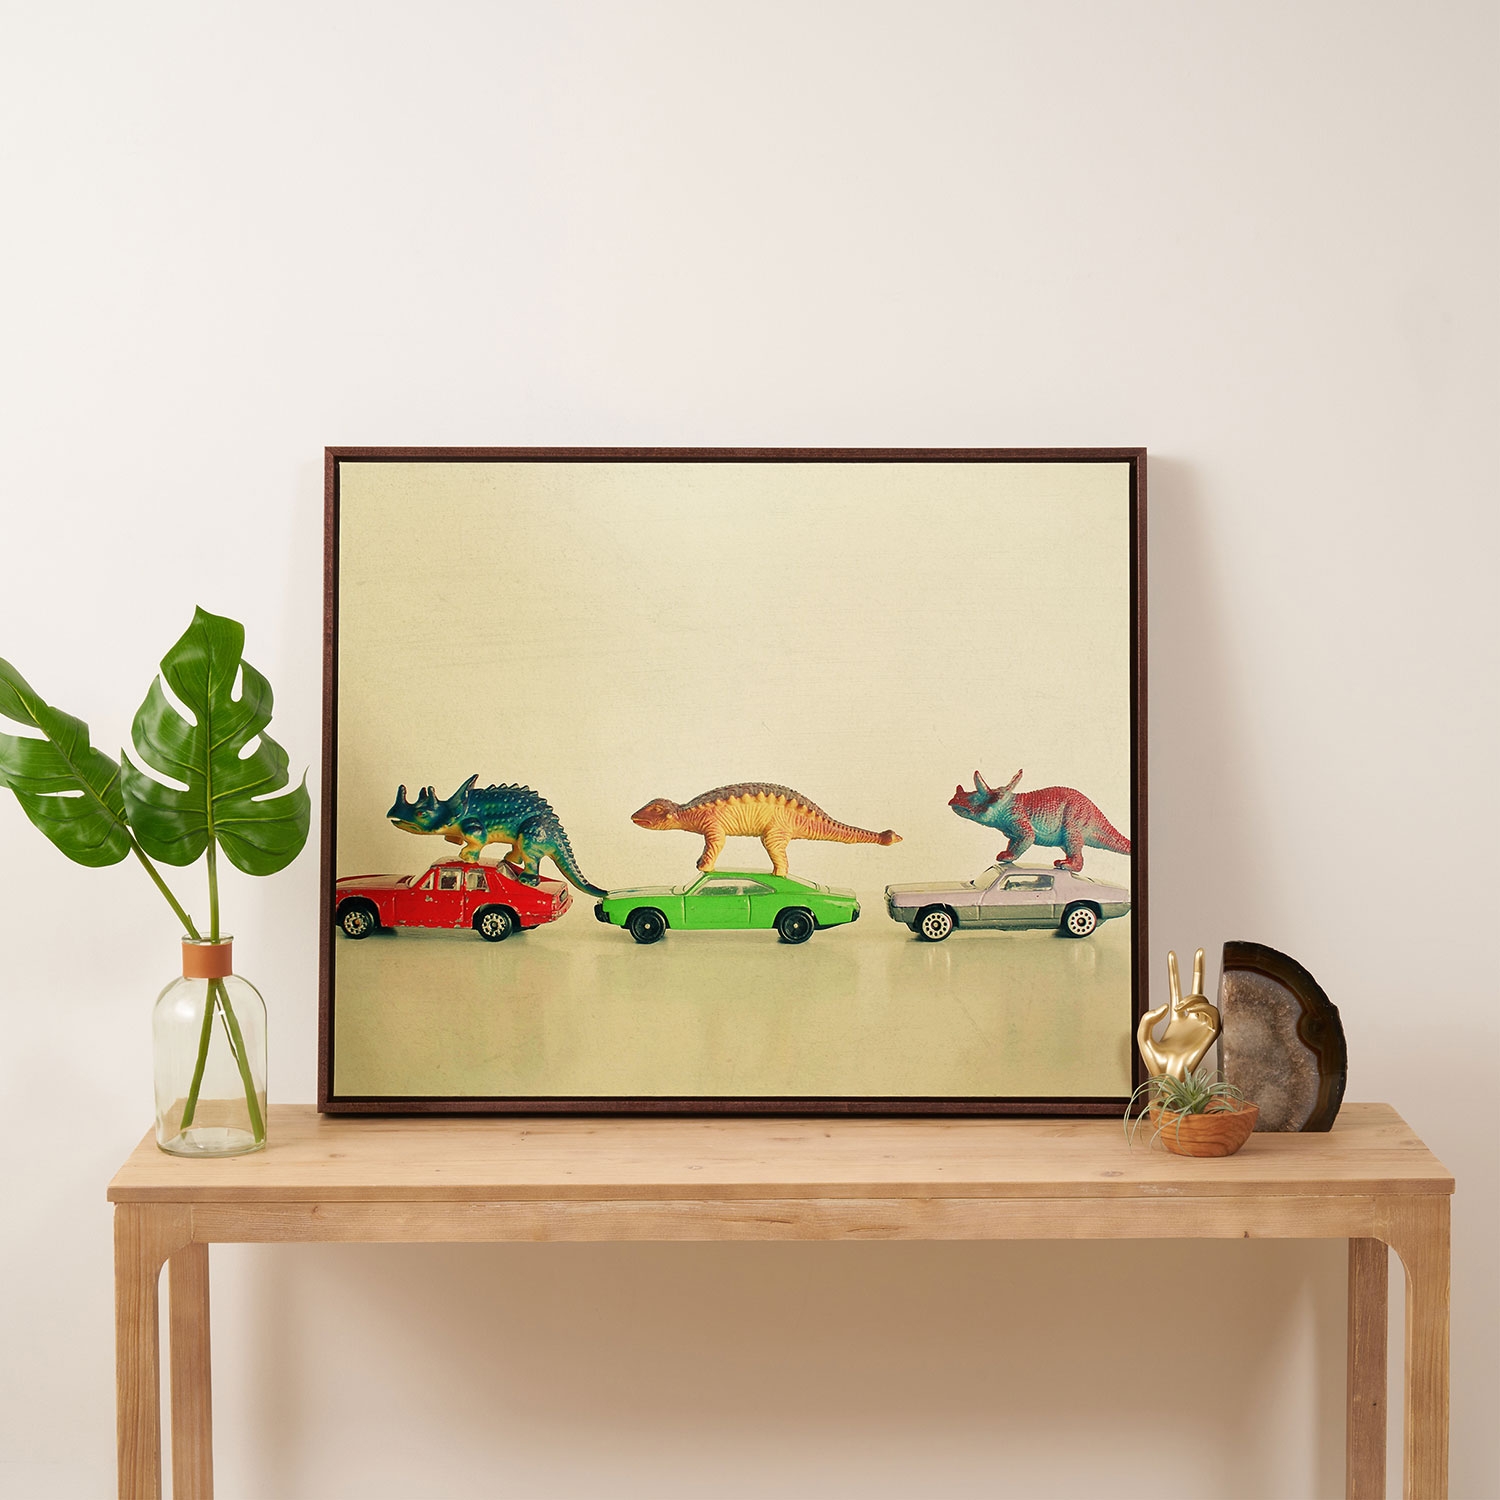 Dinosaurs Ride Cars by Cassia Beck - Art Canvas 24" x 30" - Image 3